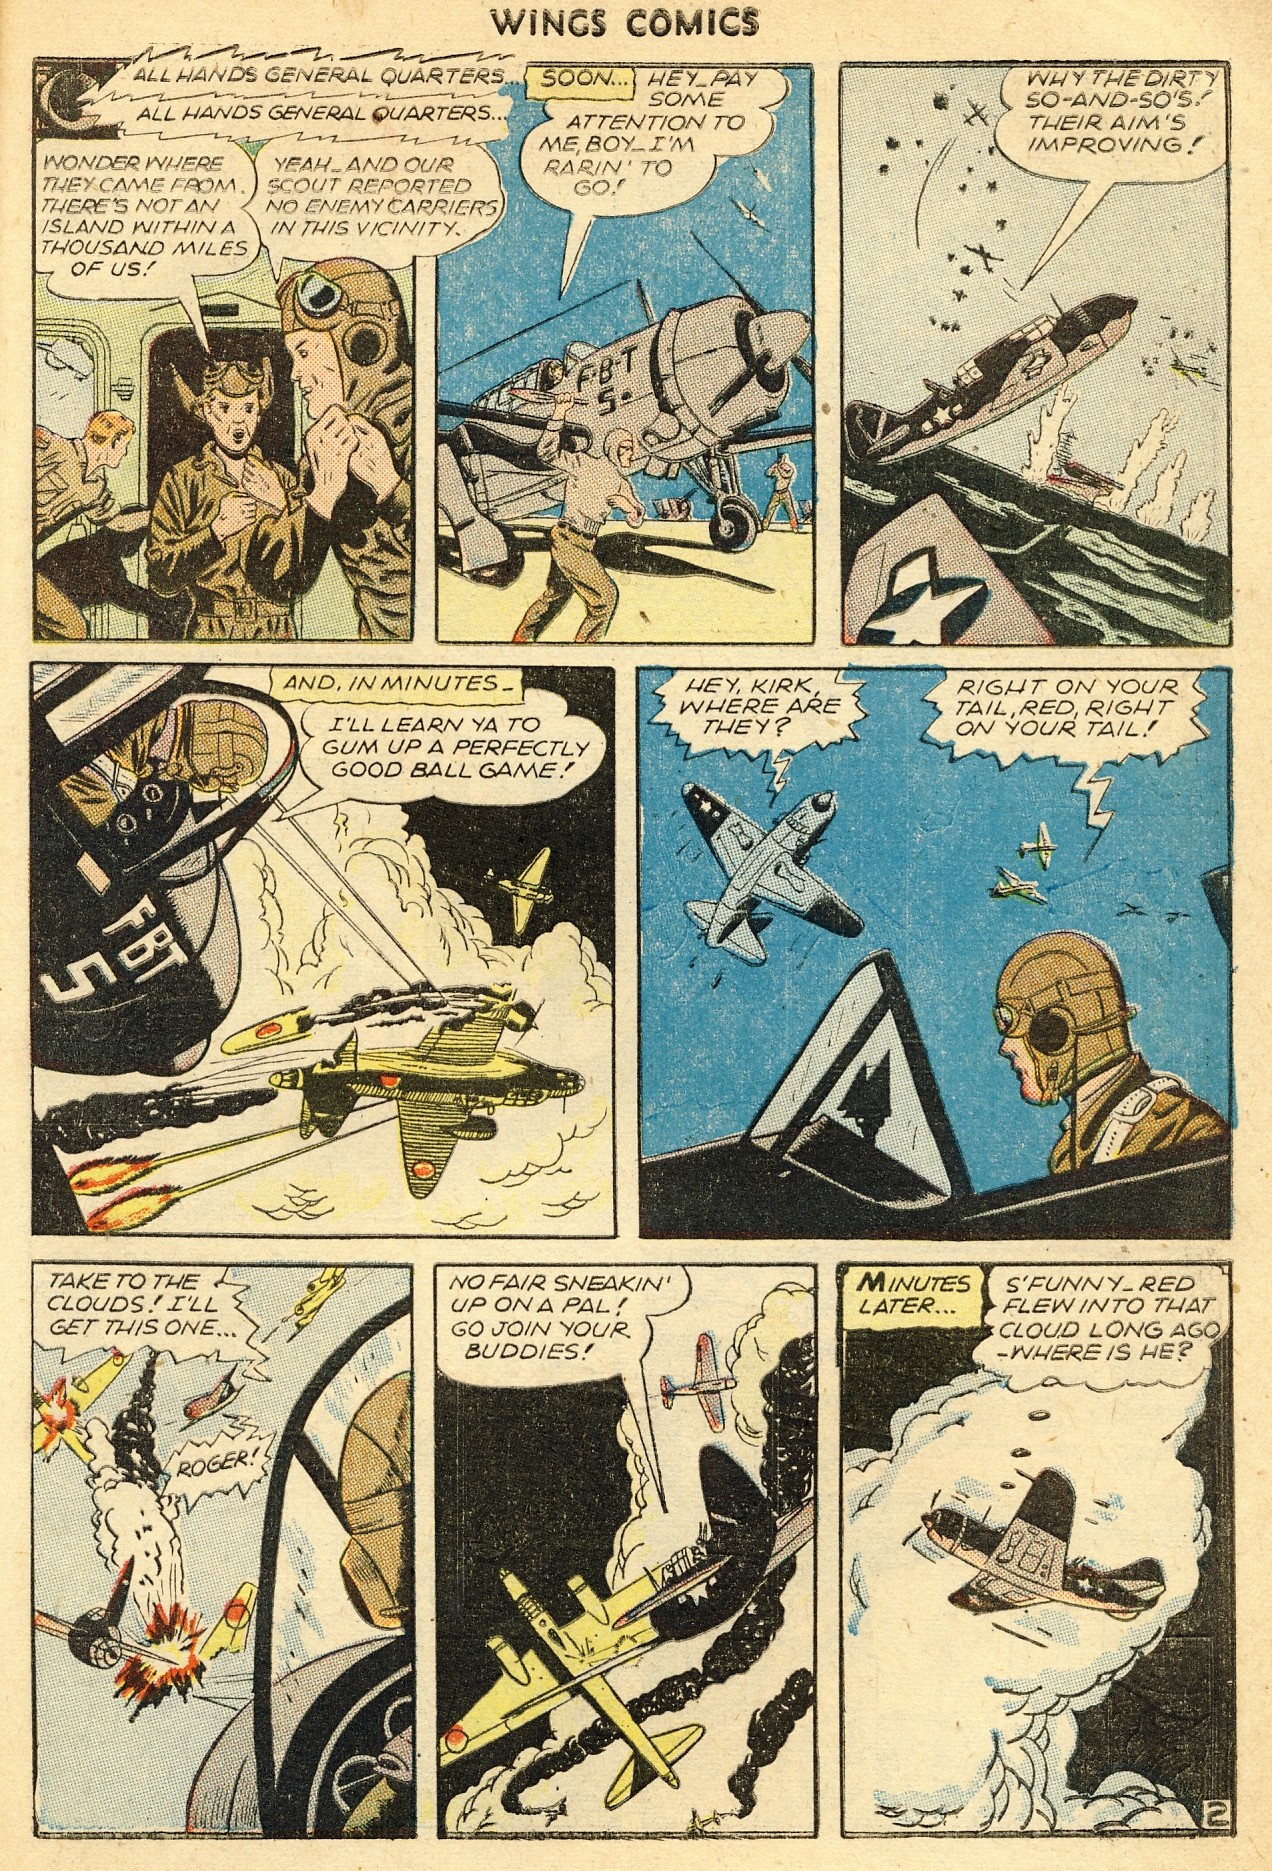 Read online Wings Comics comic -  Issue #64 - 31